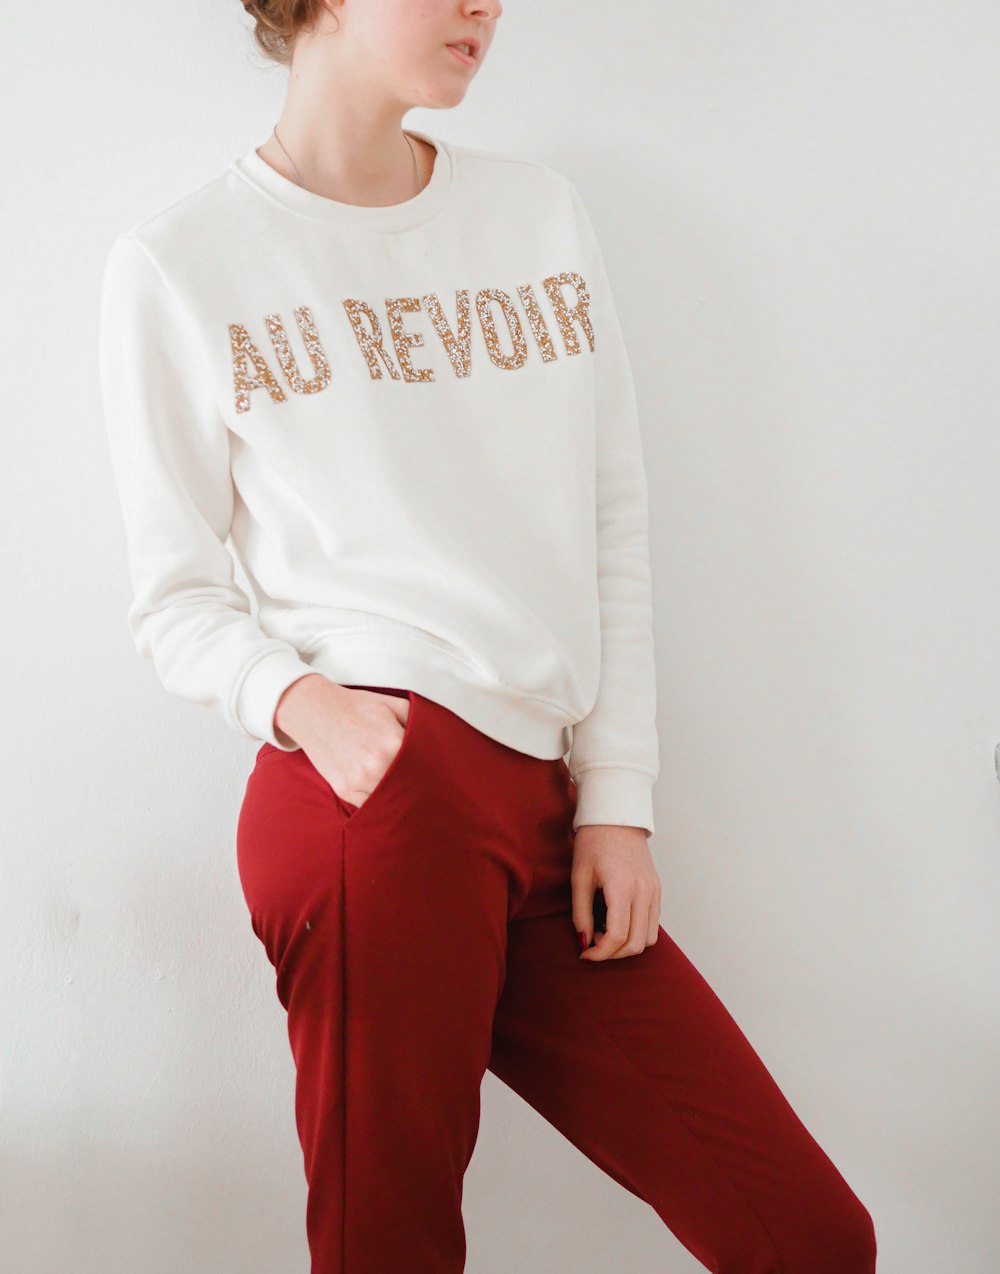 woman in white long sleeve shirt and red pants